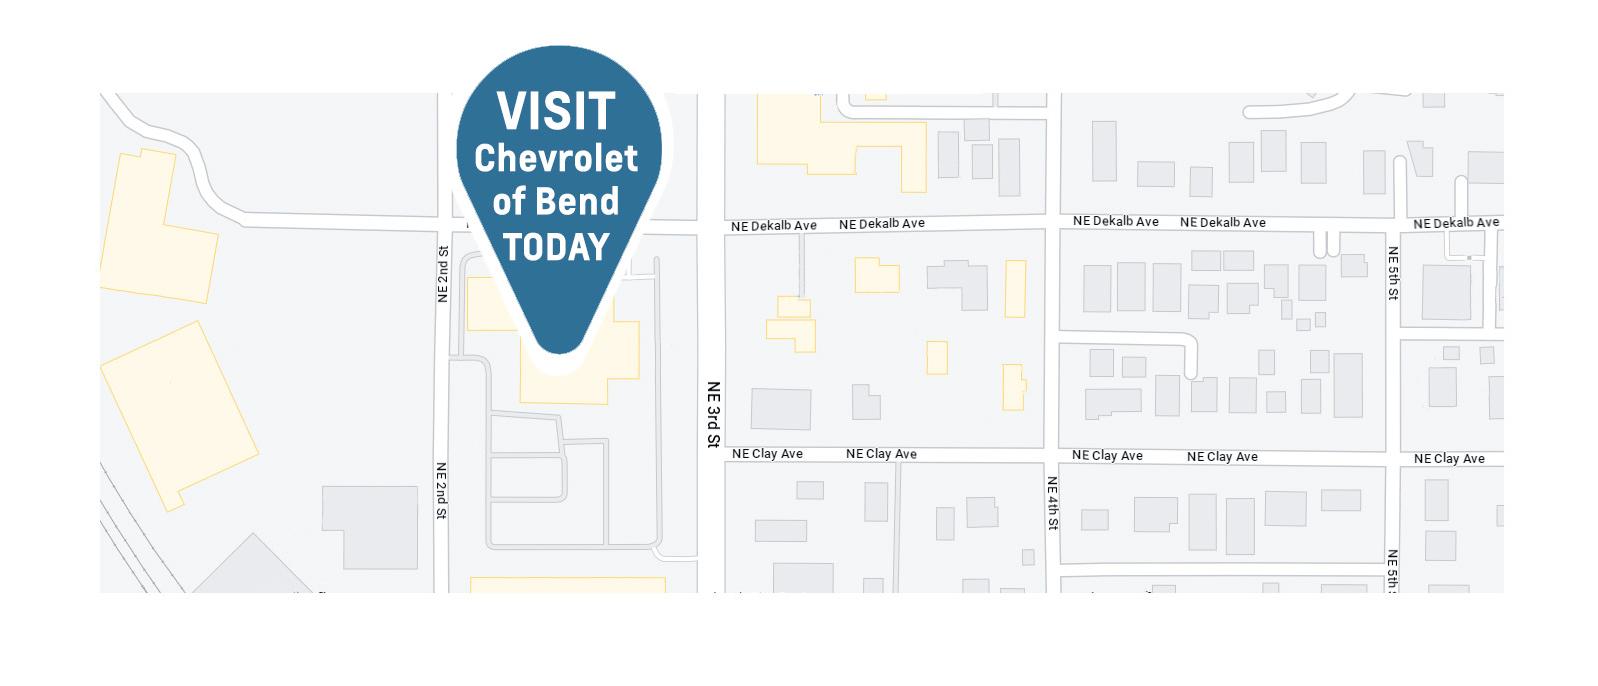 Chevrolet of Bend map